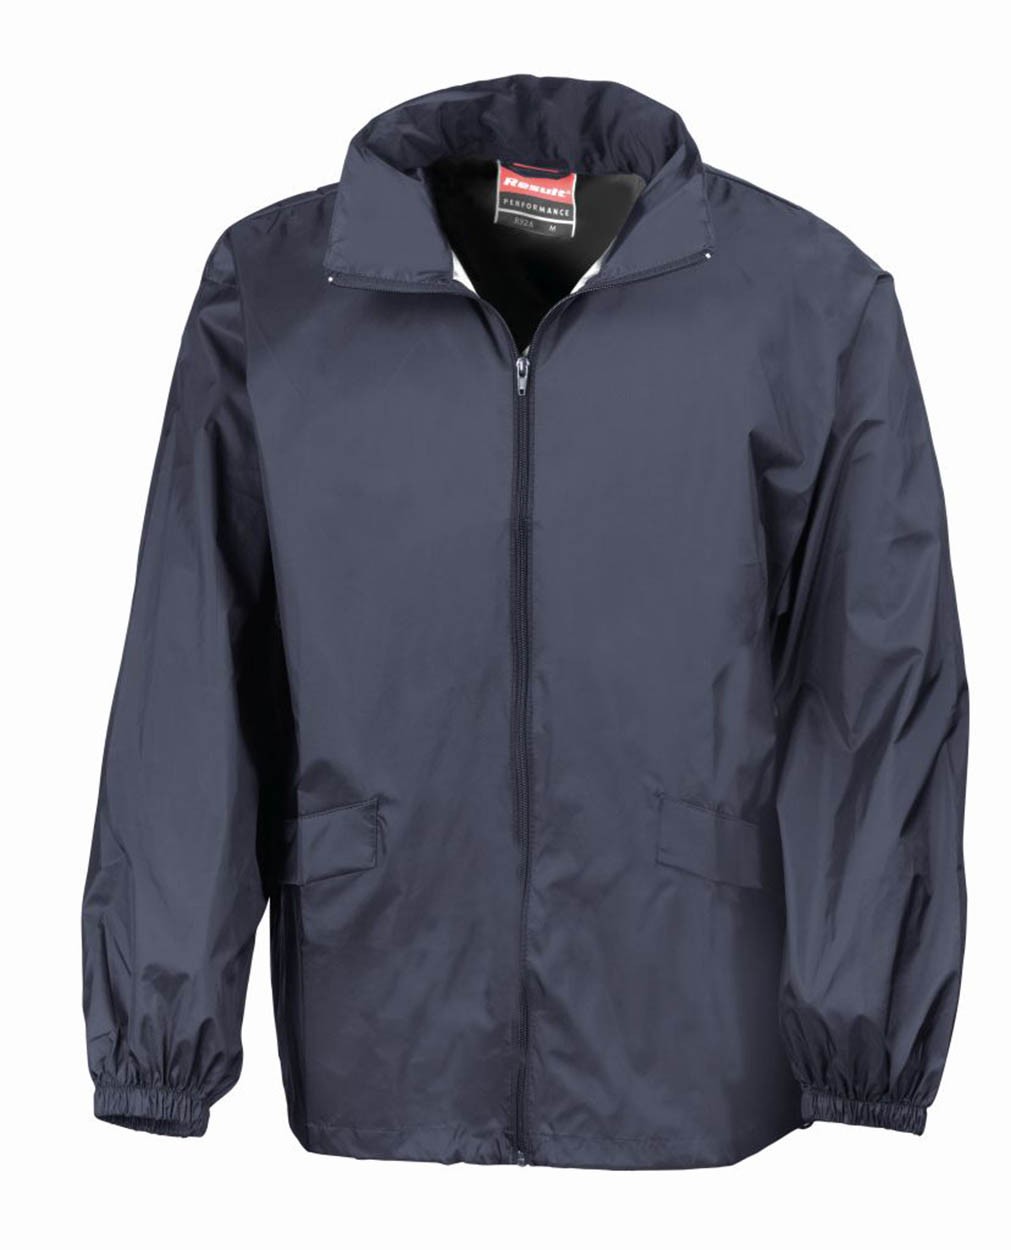 Result RS92 Windcheater in a Bag - Lightweight Leisure Jackets - Leisure  Jackets - Leisurewear - Best Workwear